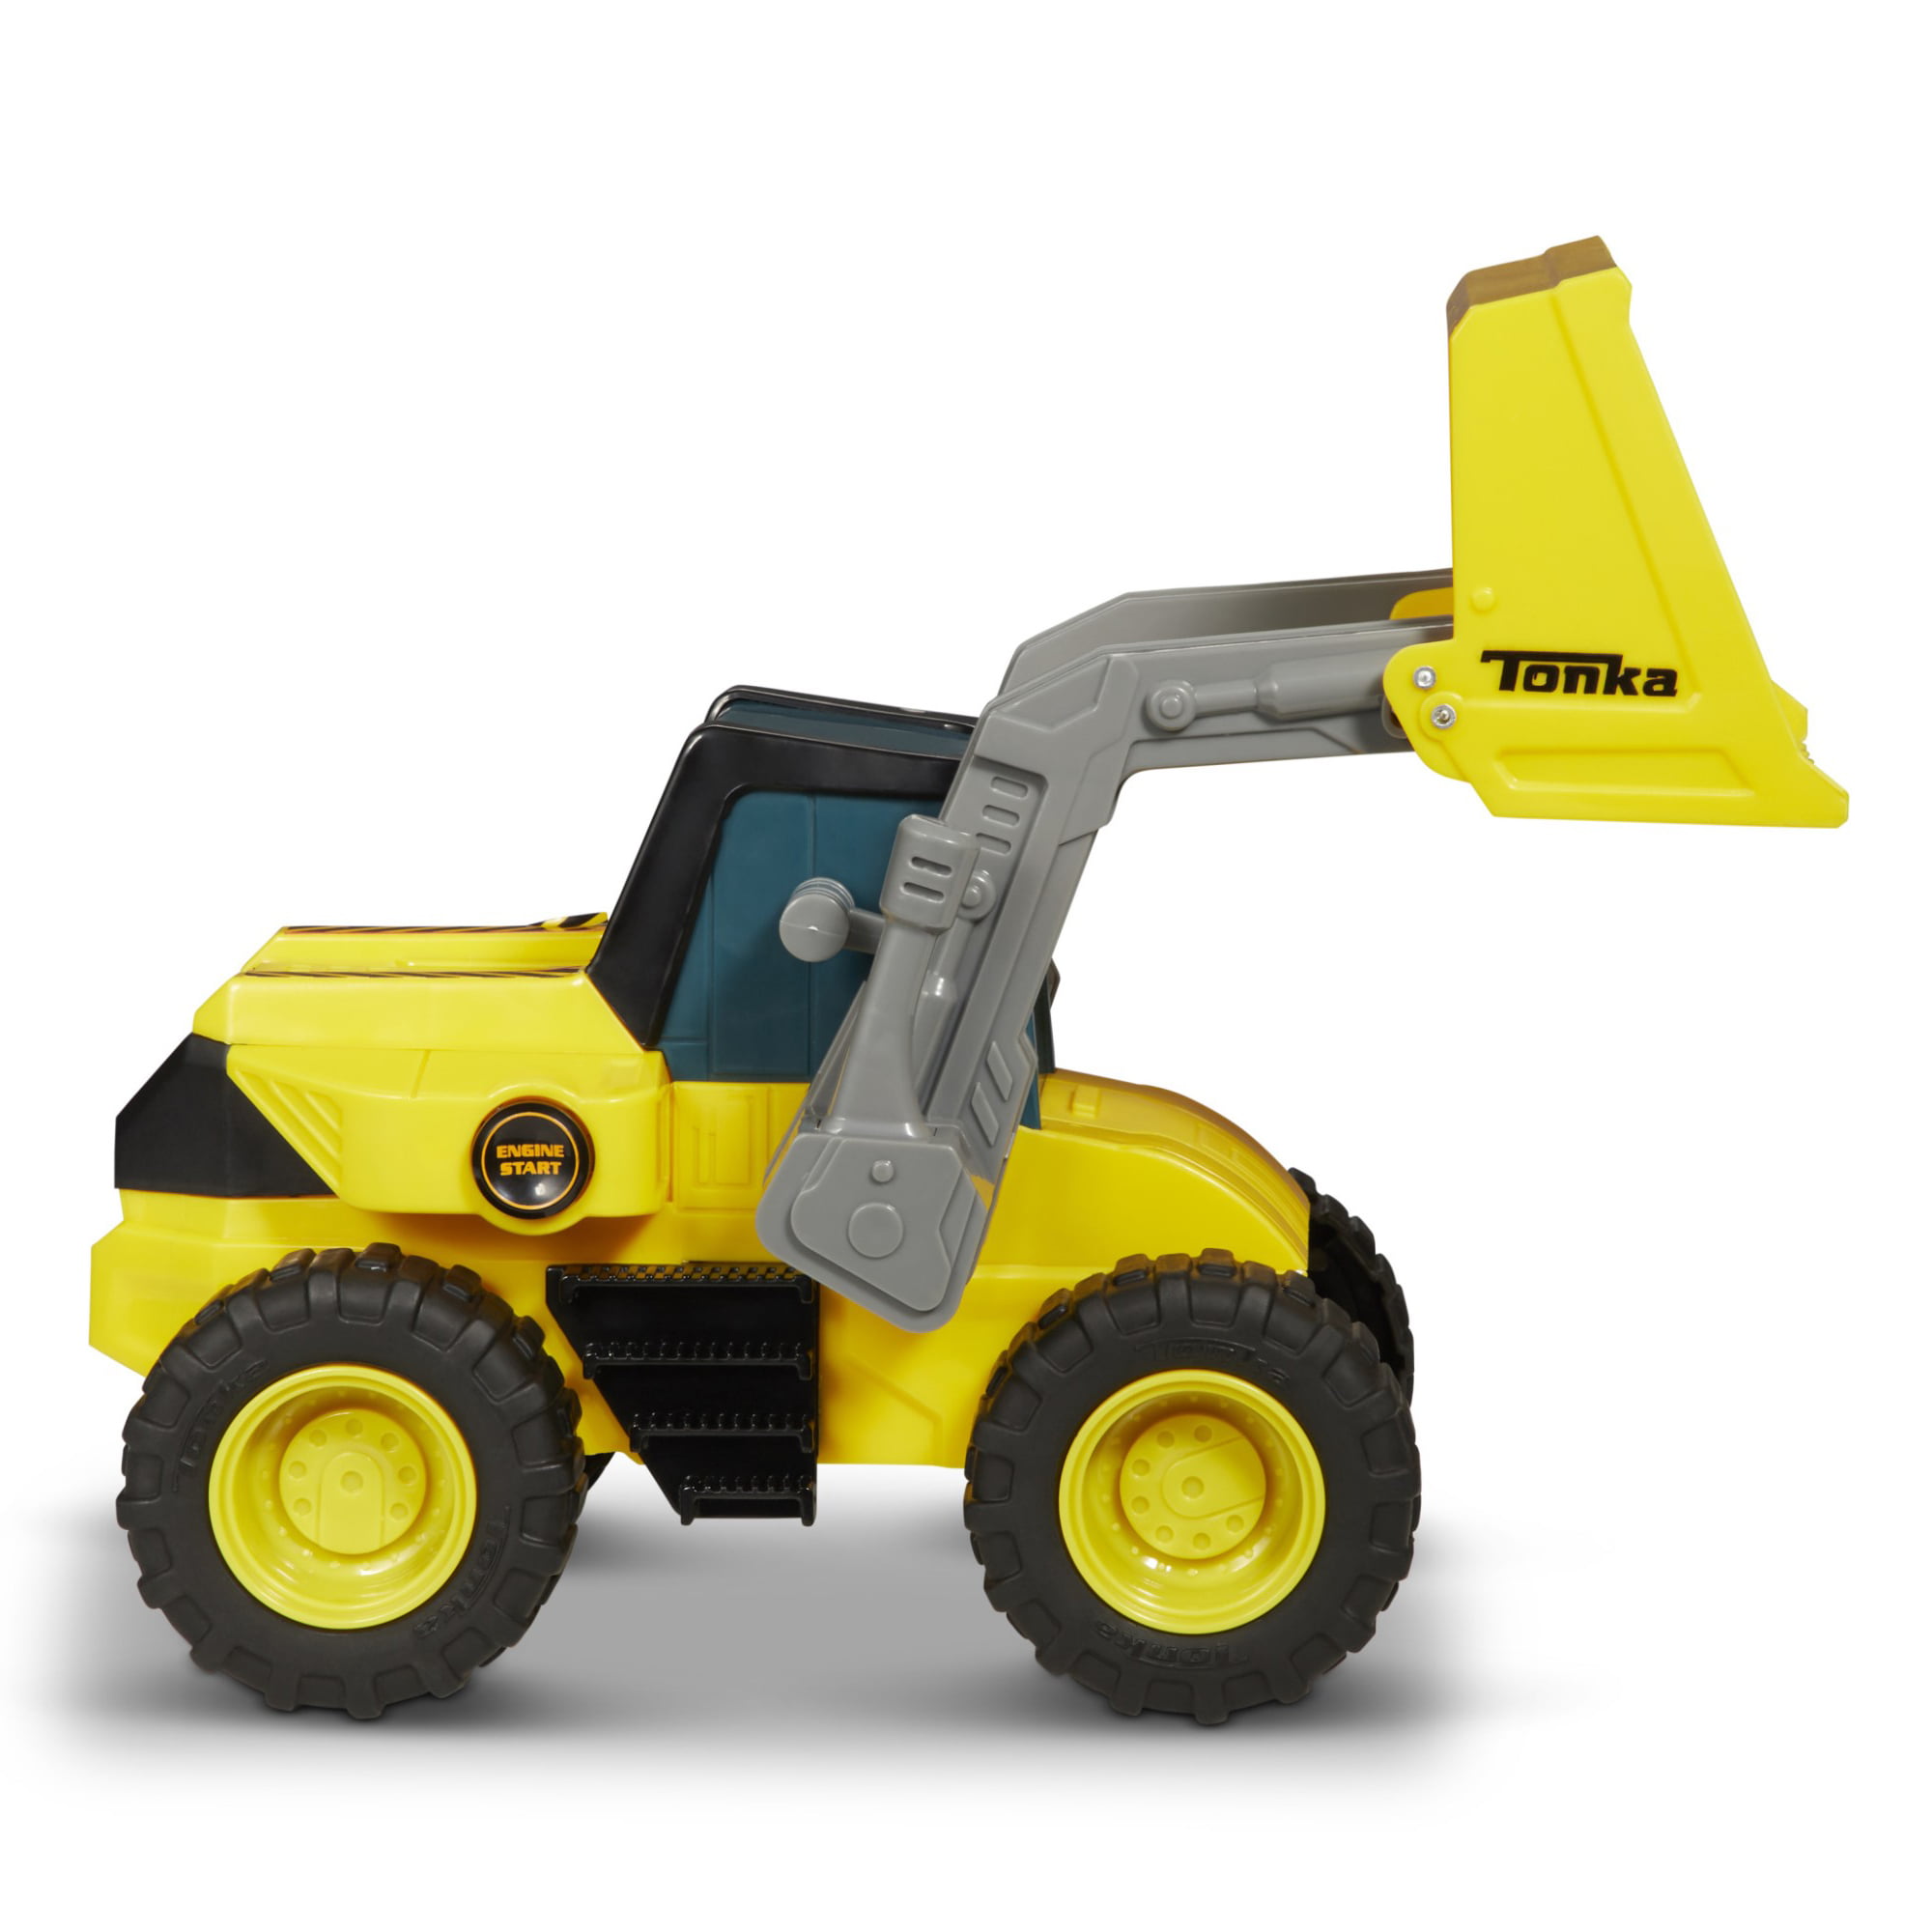 tonka classic steel front end loader